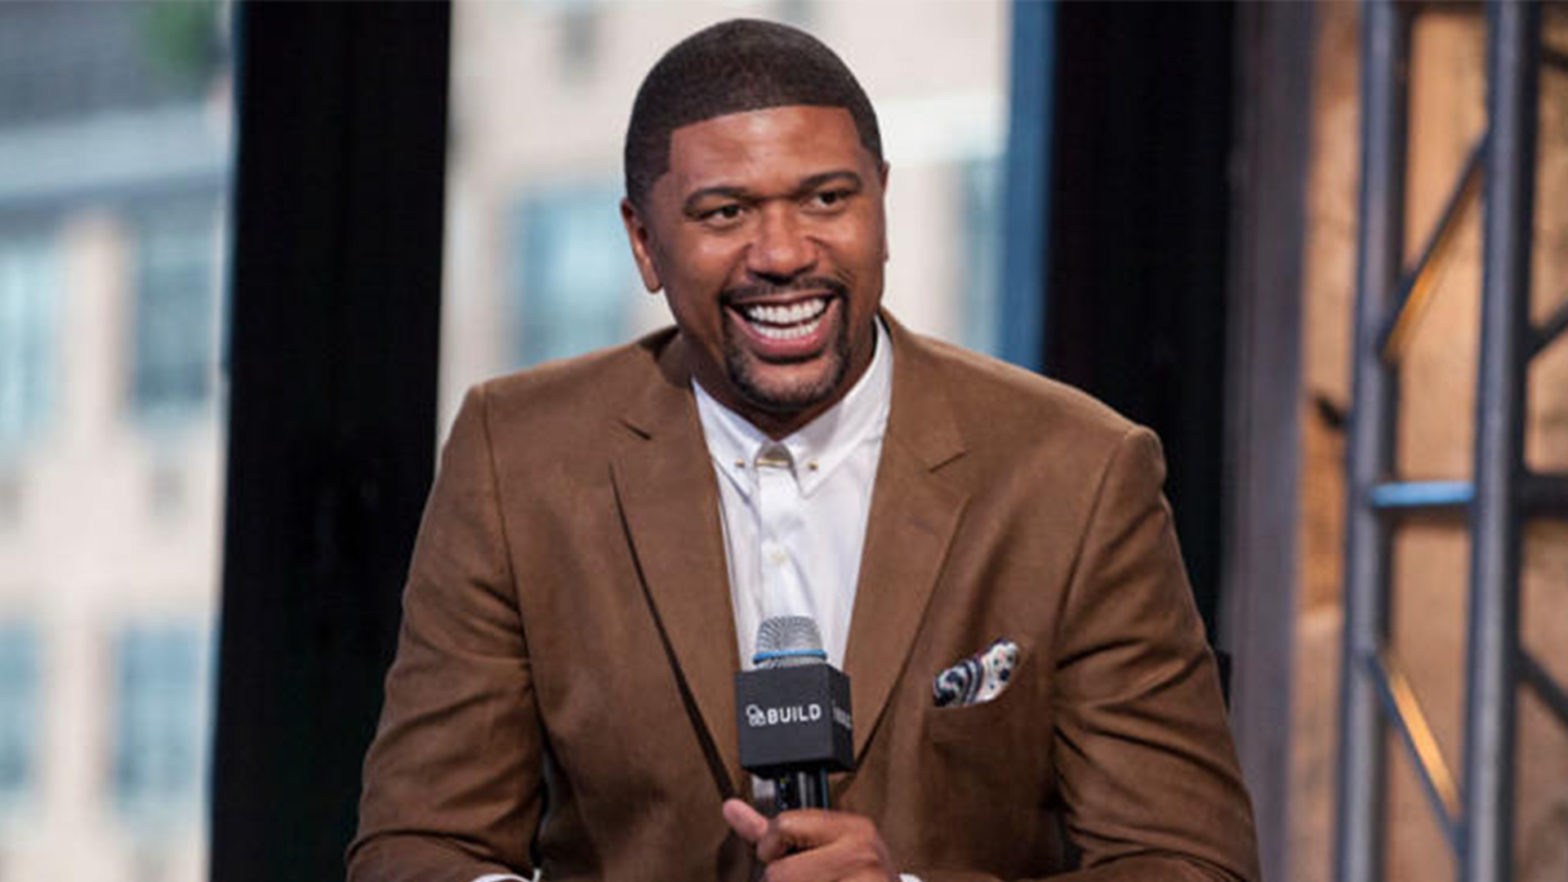 Former NBA Player Jalen Rose Opened Tuition-Free Charter High School That Provides Post Graduation Support